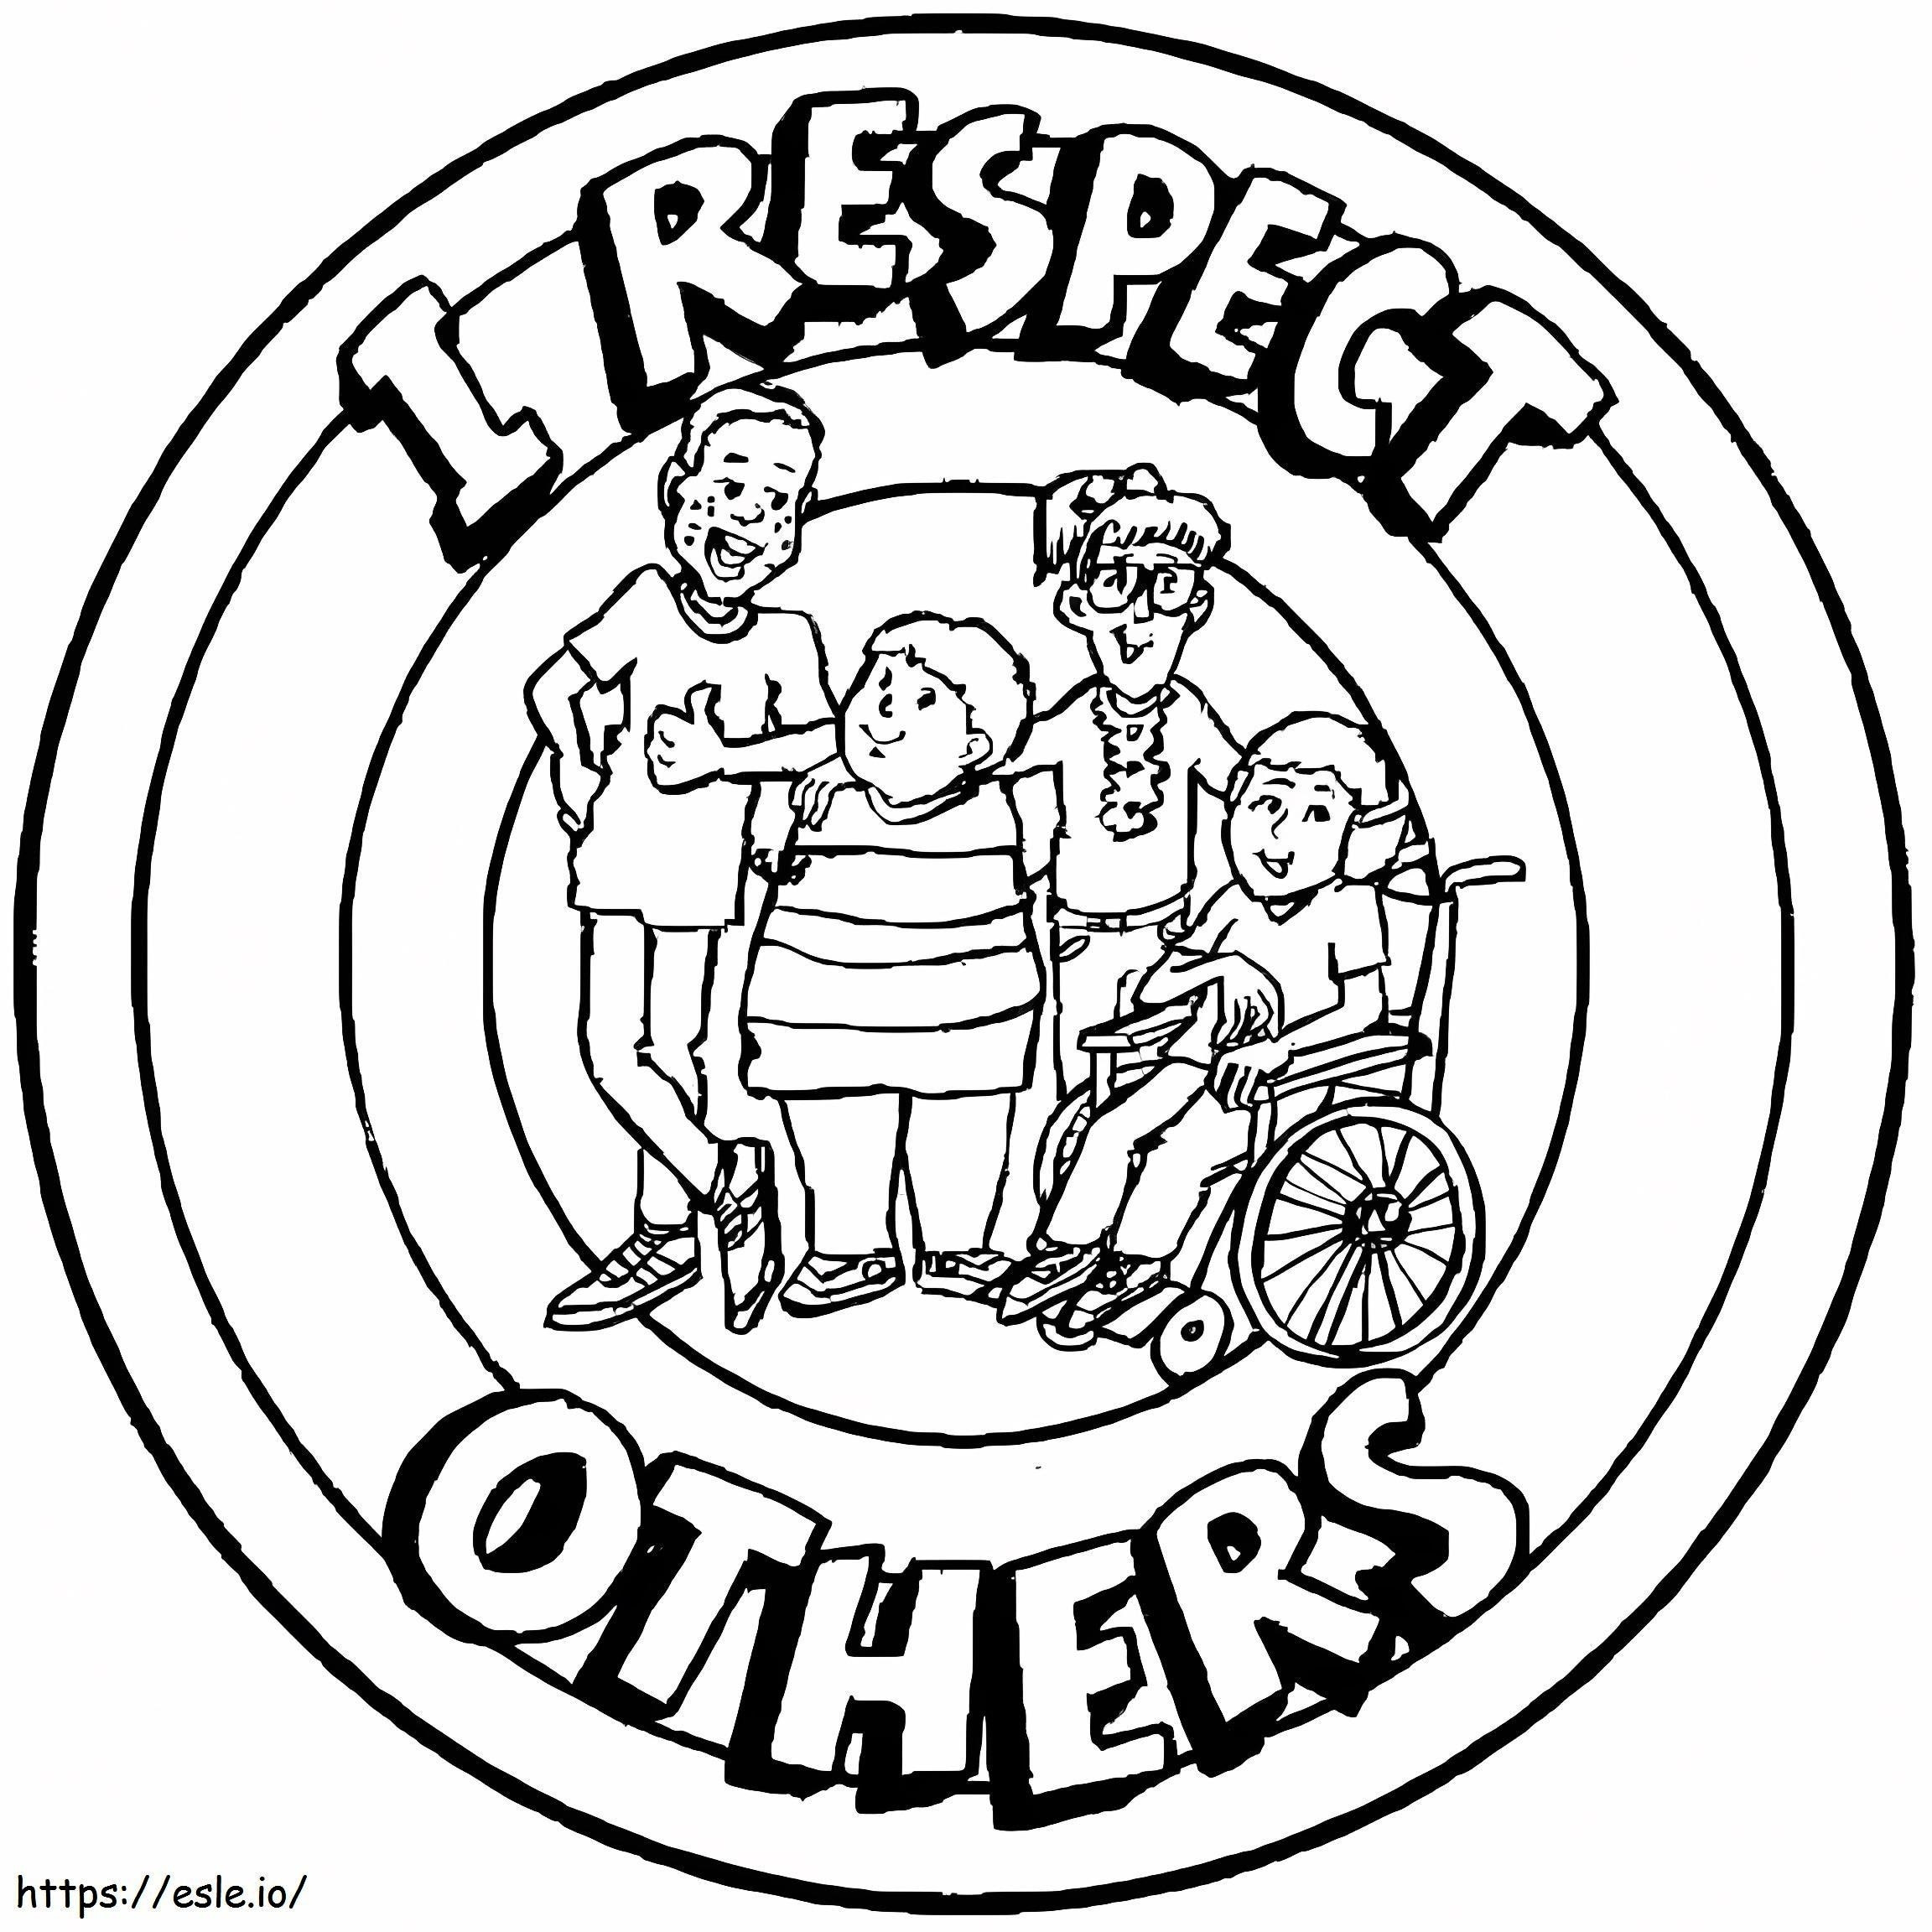 I Respect Others coloring page